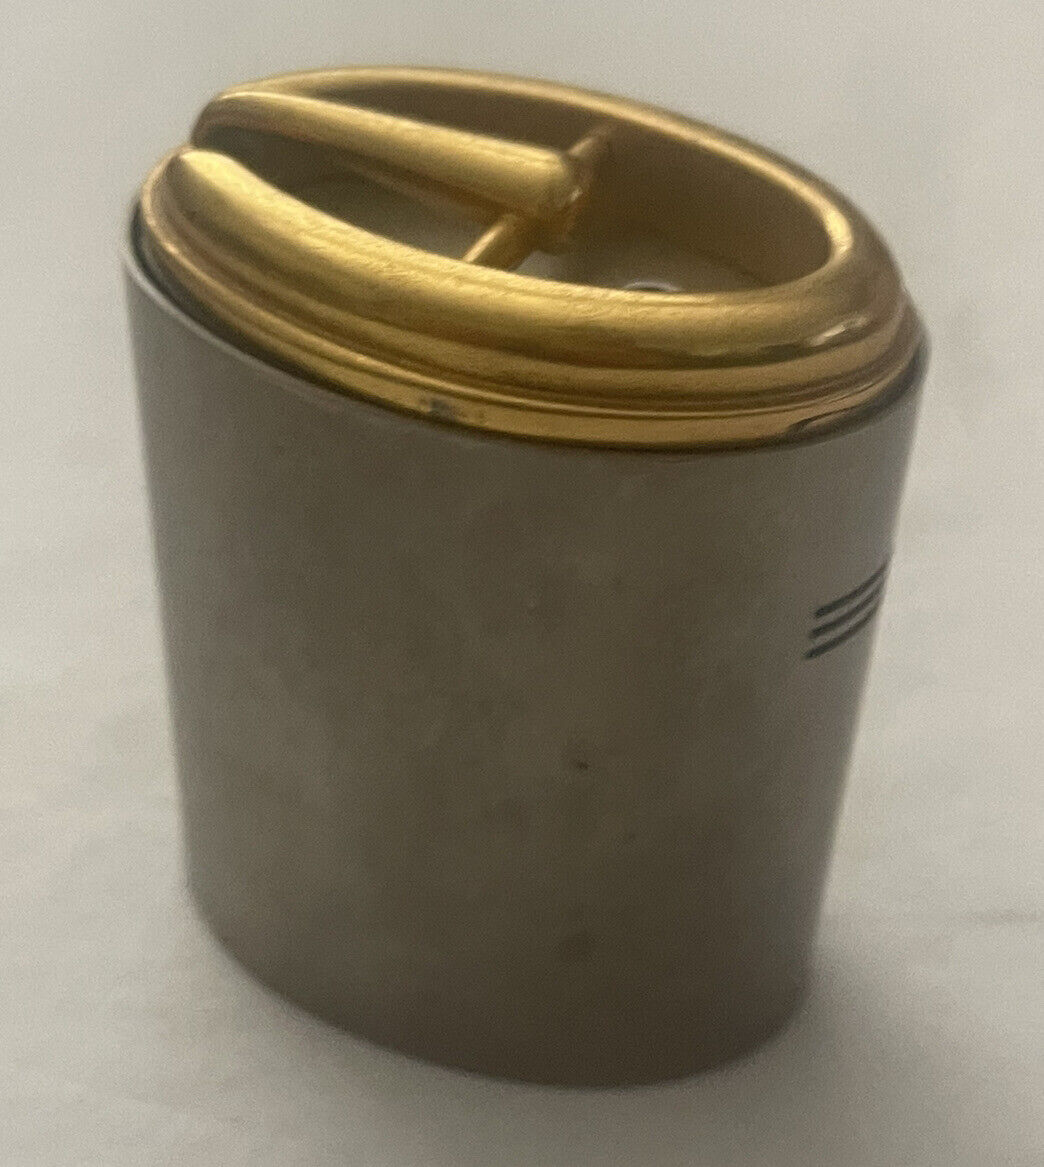 Rare Vintage Gucci Table Lighter made in Italy